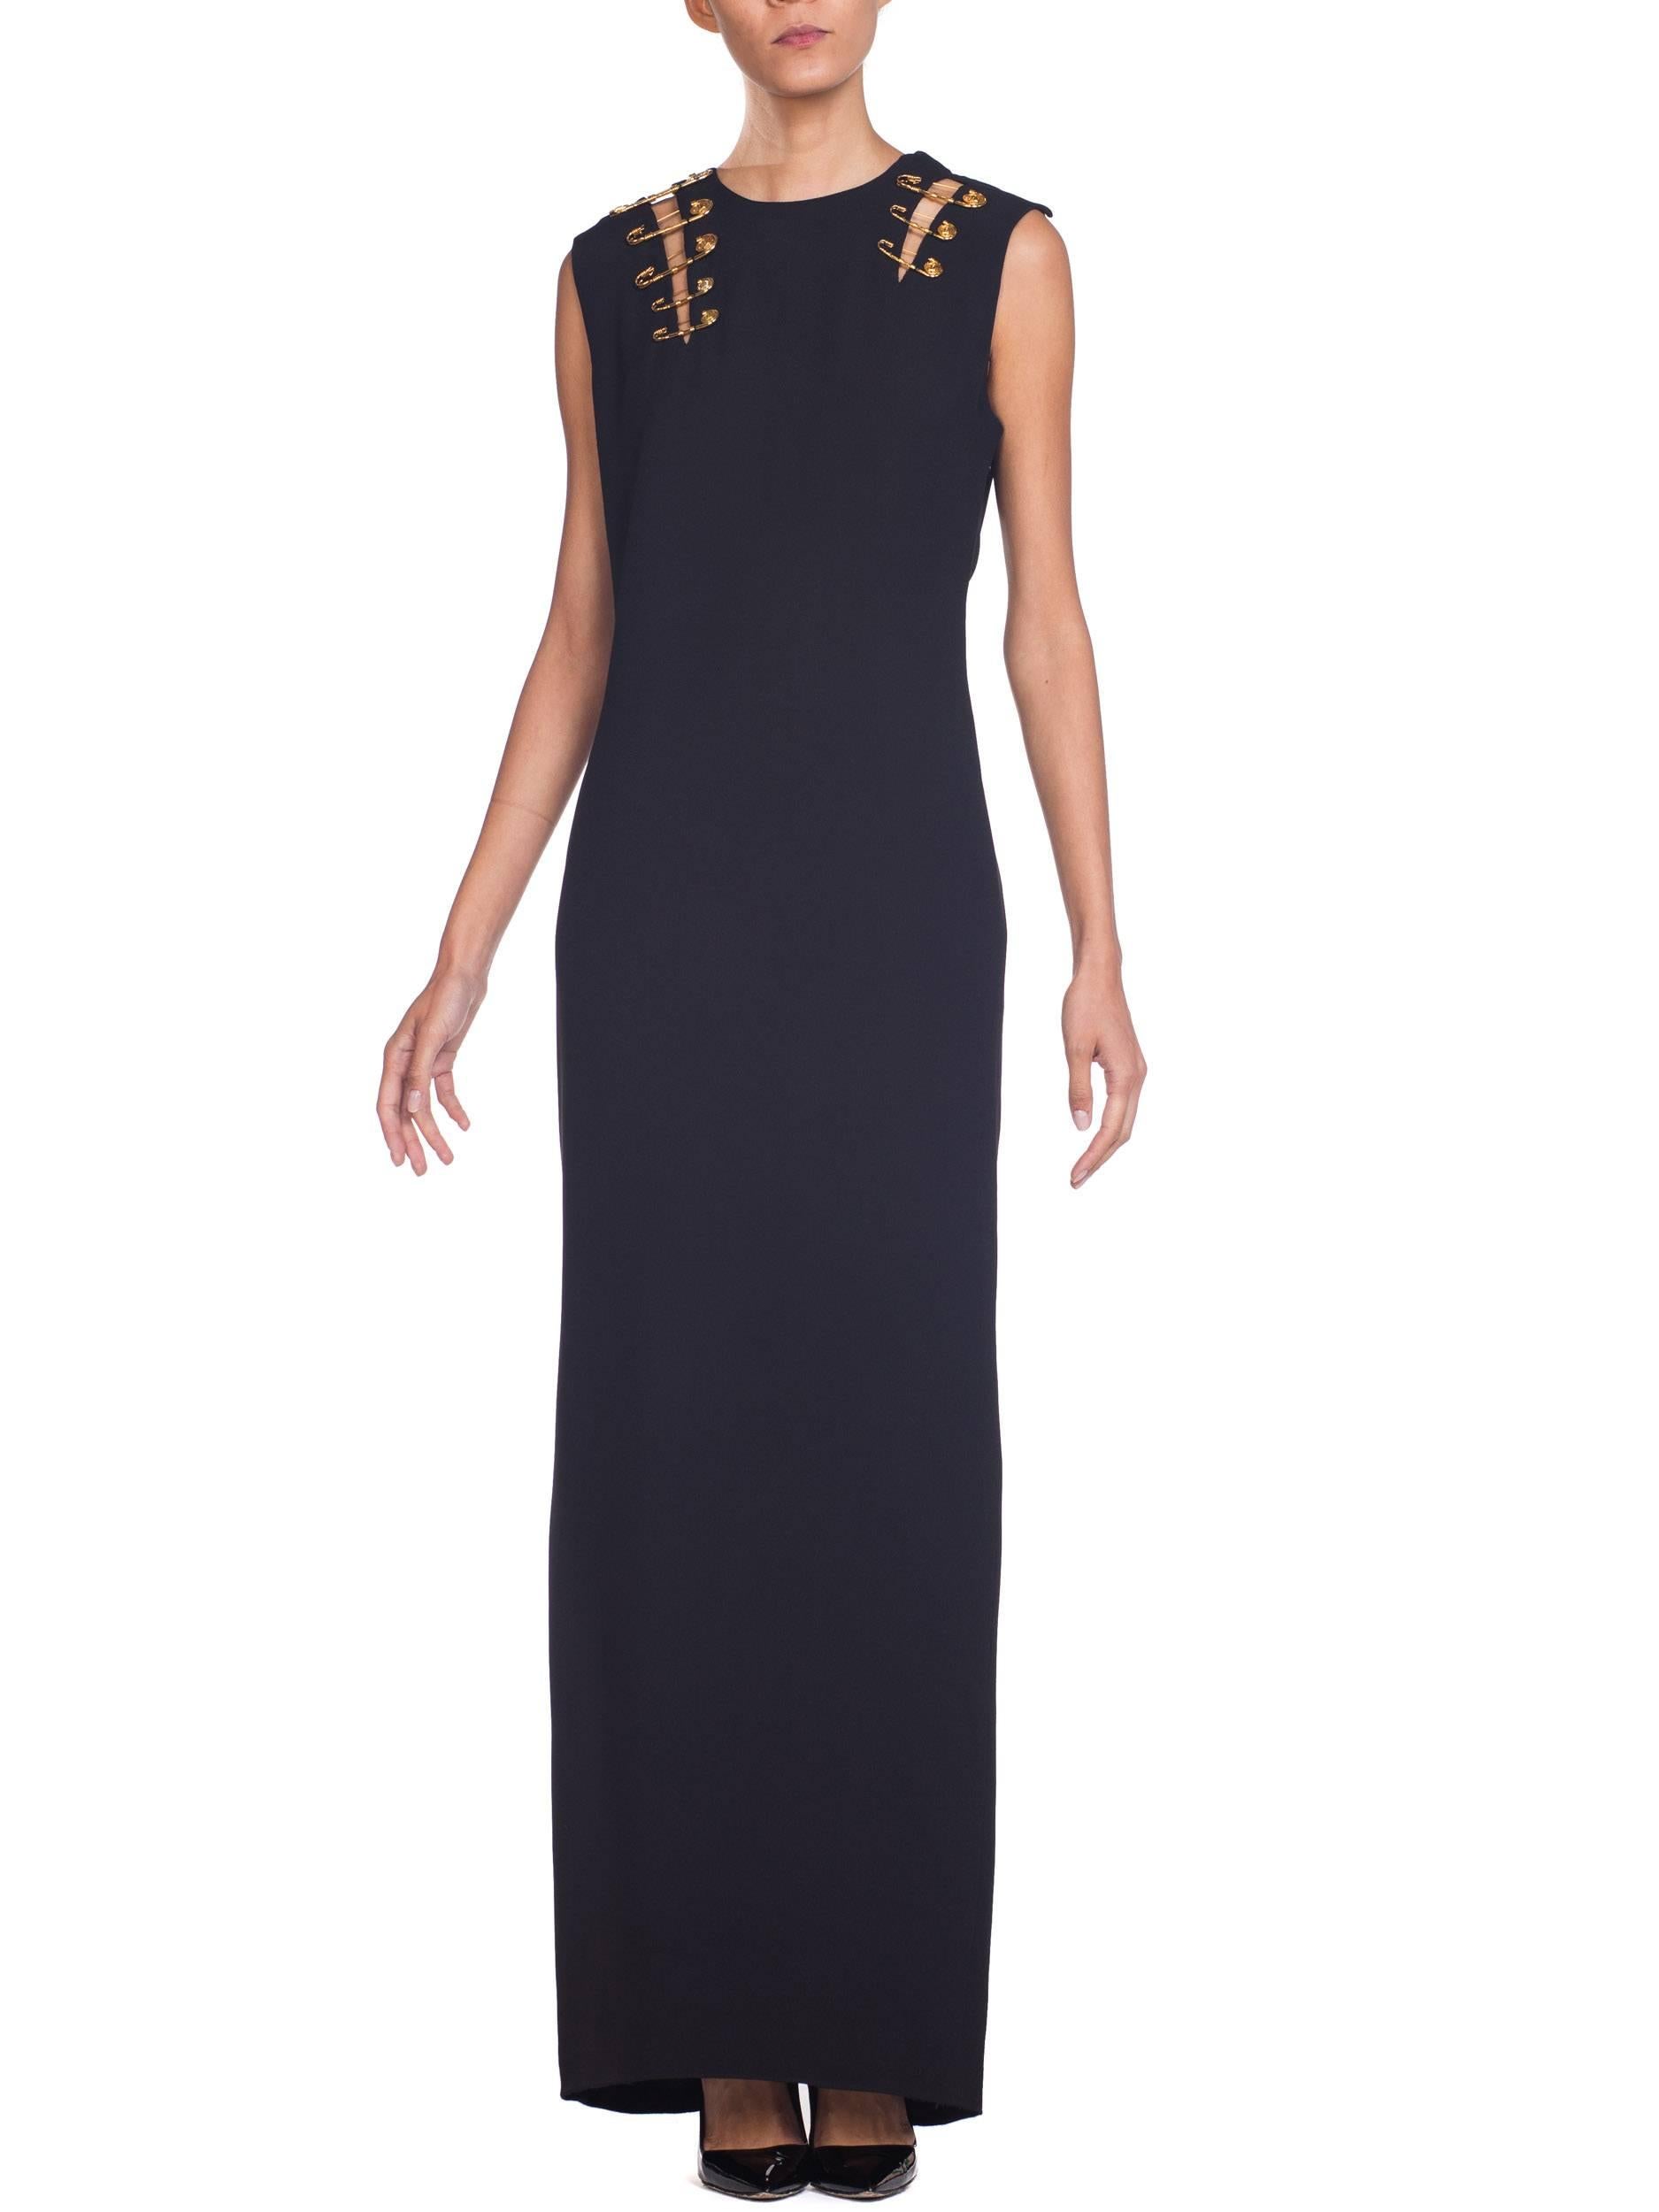 Women's 1990S GIANNI VERSACE Black Silk Crepe Gold Safey Pin Gown For Sale